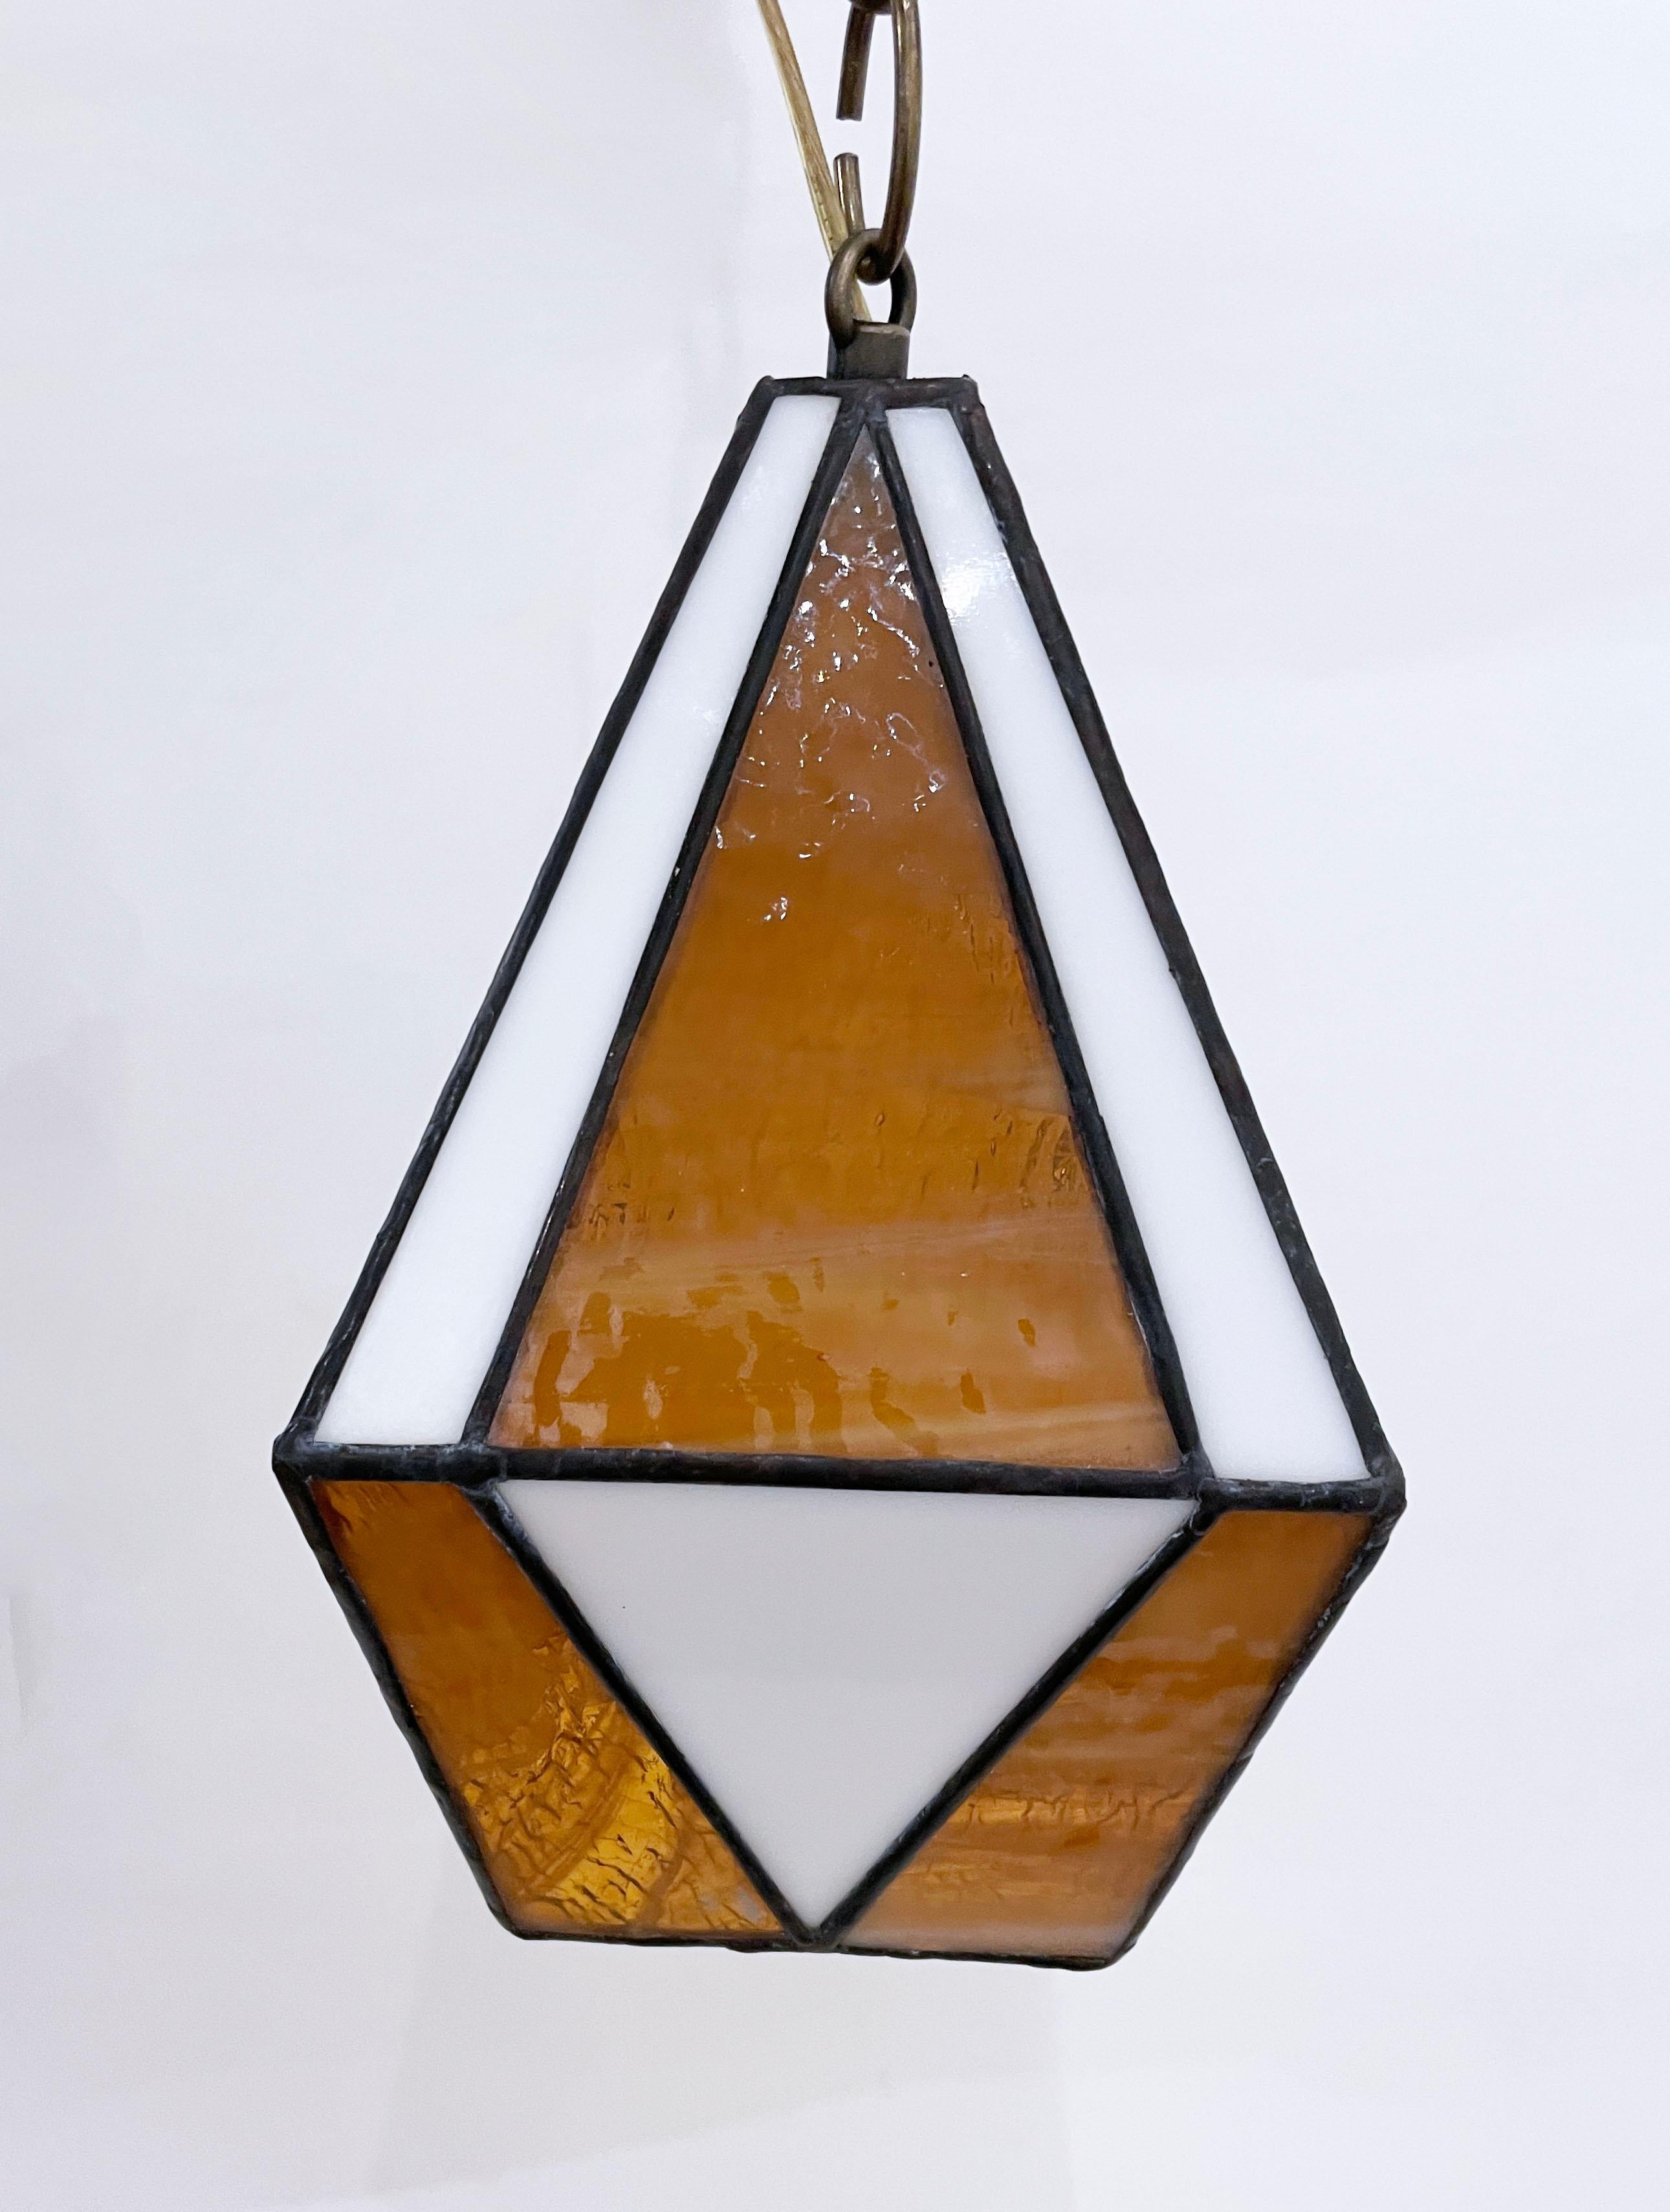 Handcrafted stained glass ceiling lamp with brass hardware, decorators chain and 8ft wall plug with toggle switch. Gold streaky and white ring mottled glass. Ready to hang.  Multiples available but each one is slightly unique by the hand made